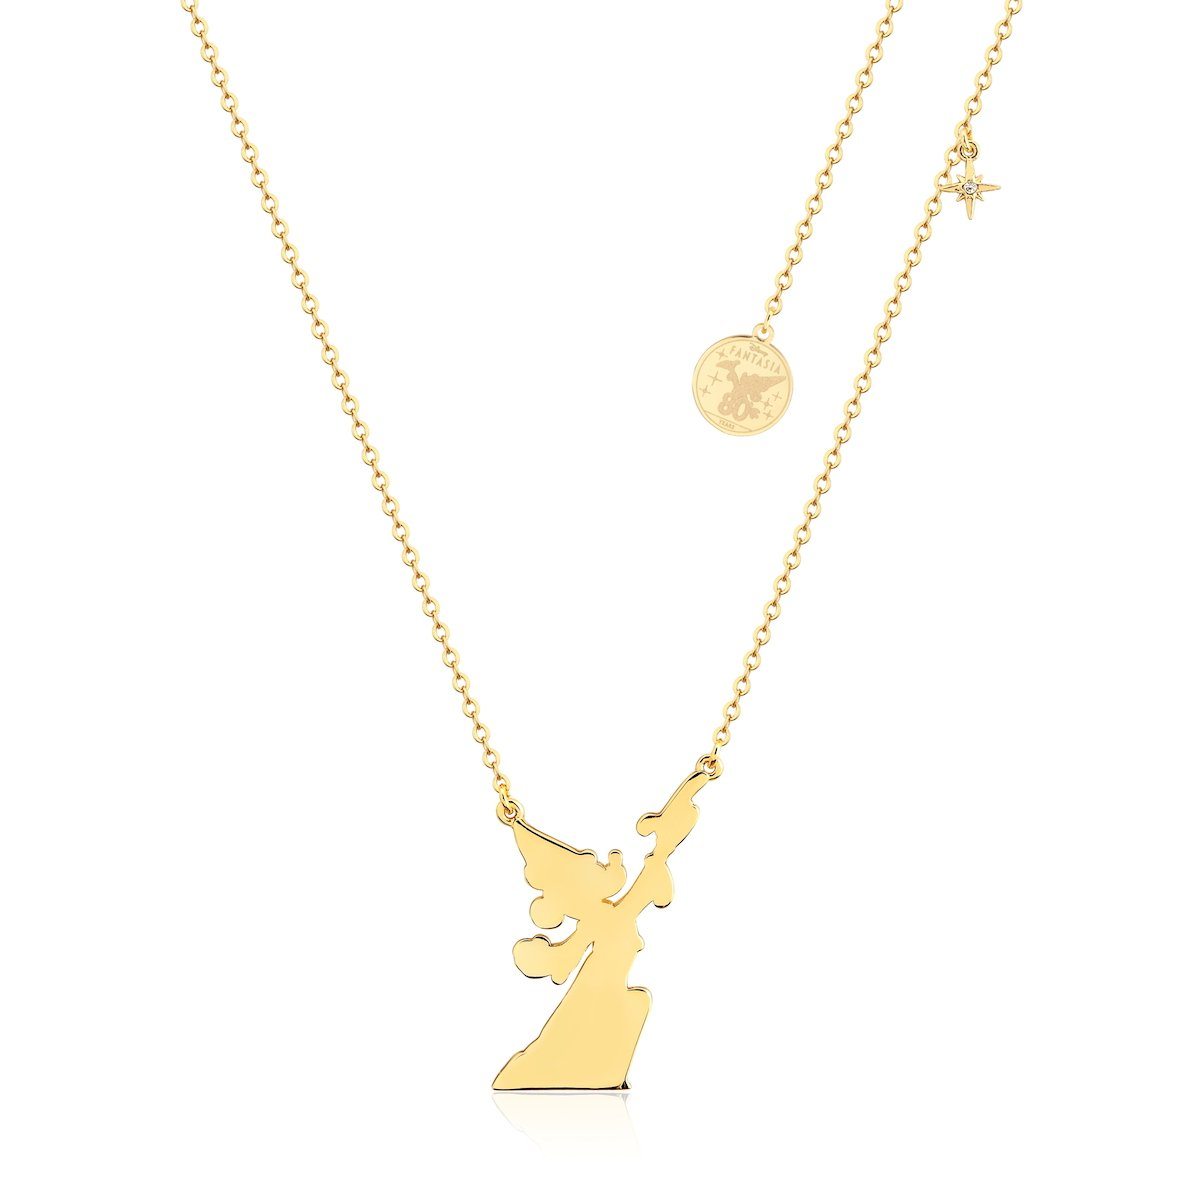 COUTURE KINGDOM- Disney Fantasia Sorcerer's Apprentice Mickey Reach for the Stars Necklace Necklace Couture Kingdom 